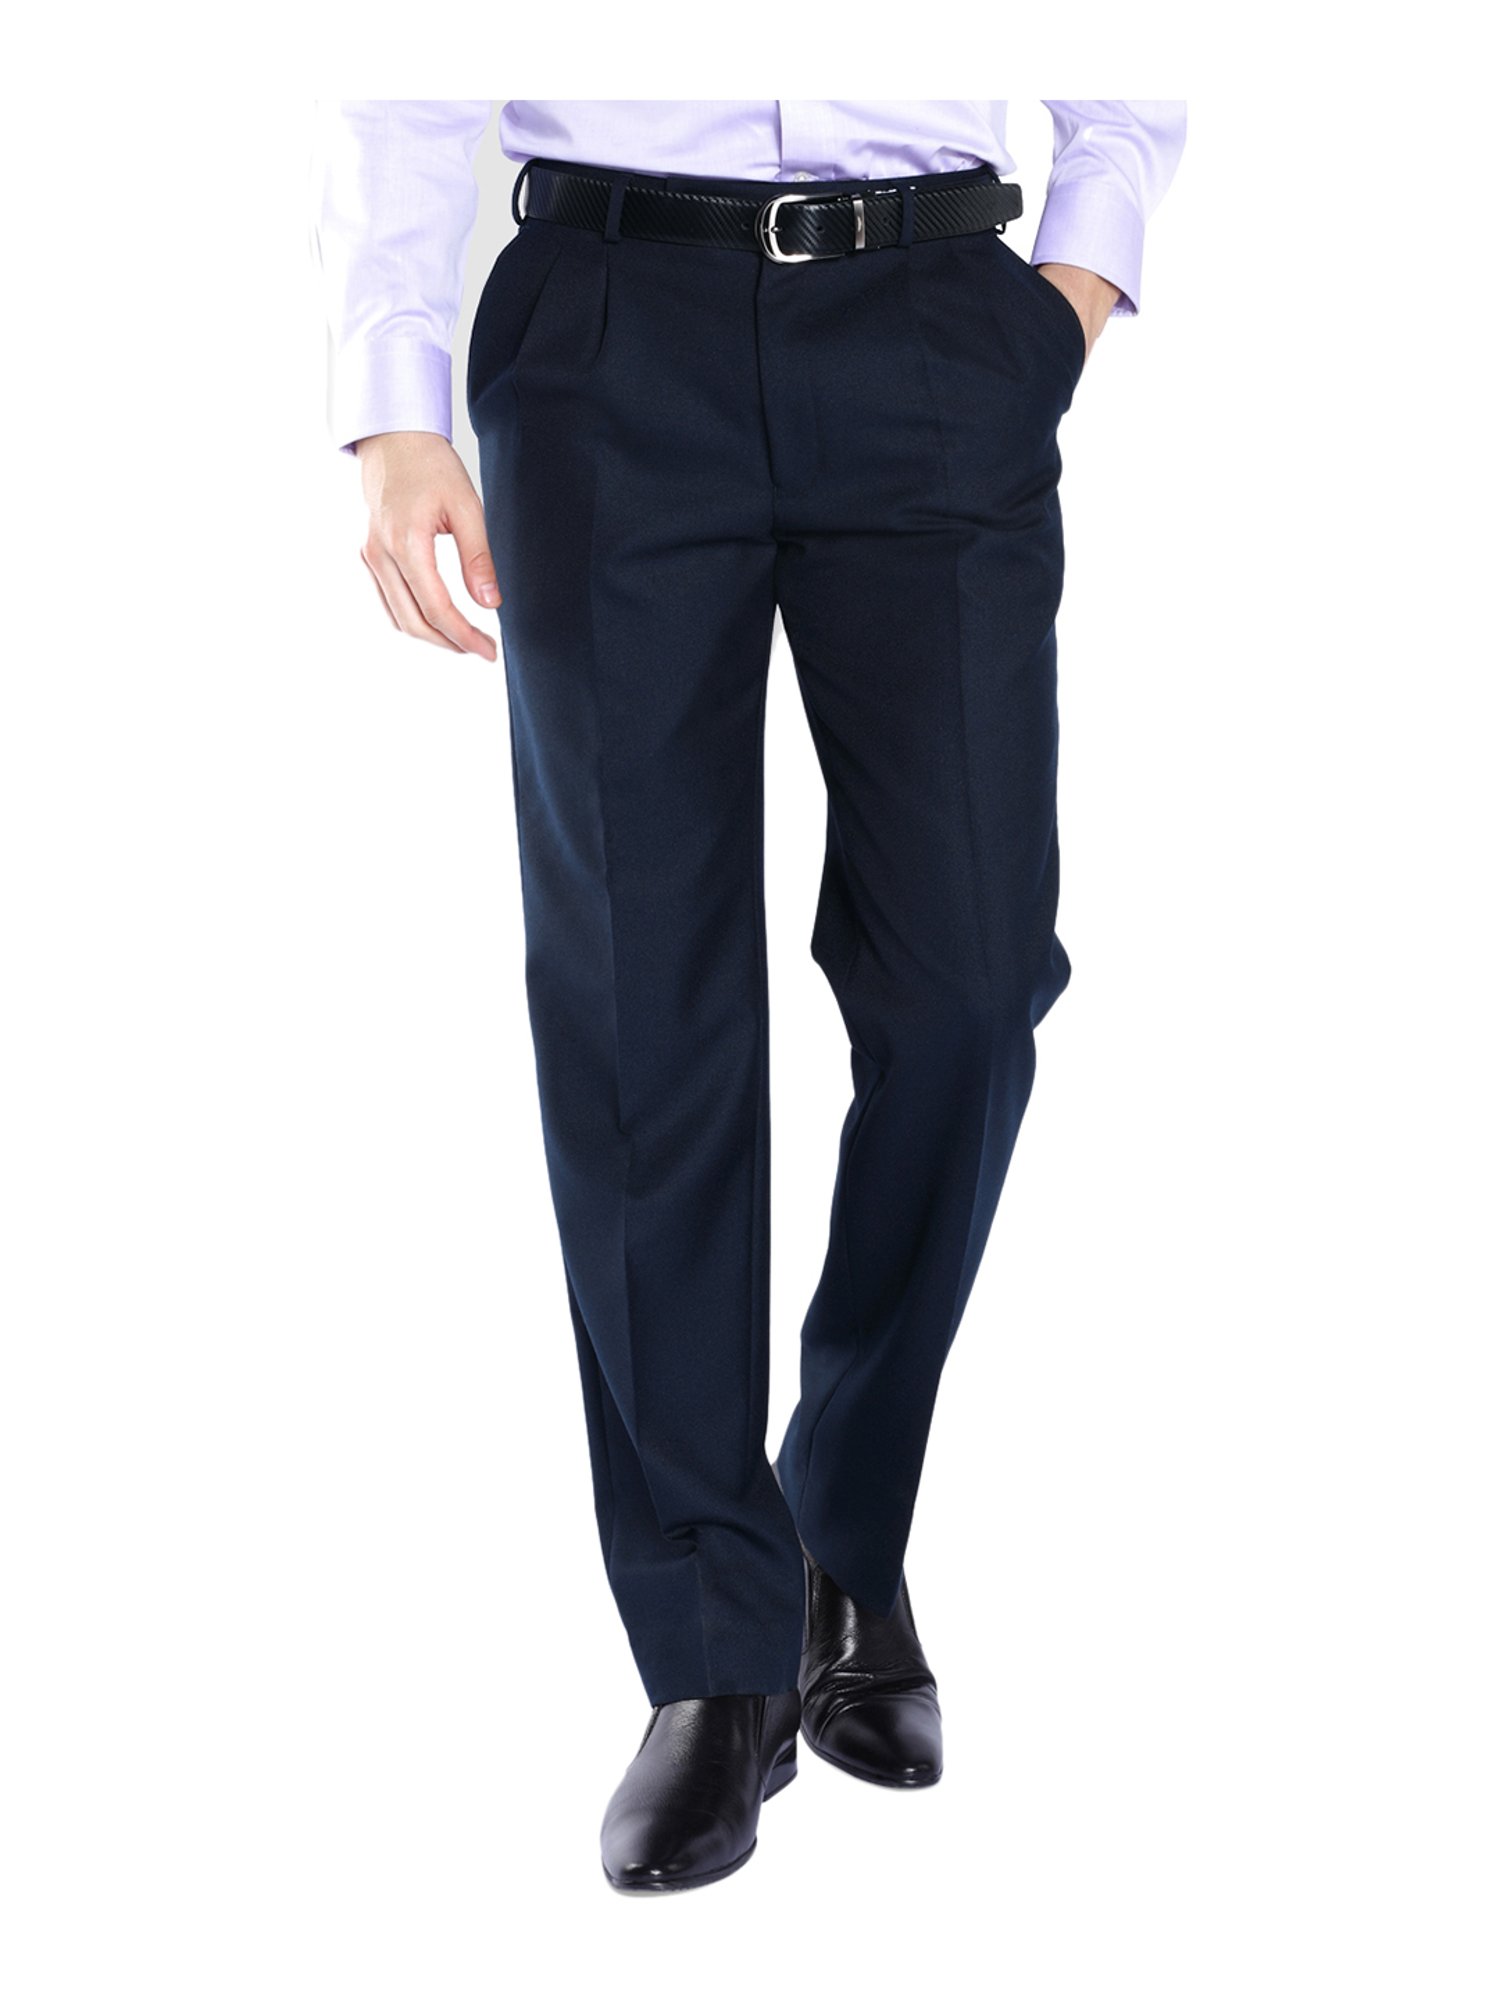 Top 8 Men's Formal Trousers For Various Occasions - Tradeindia